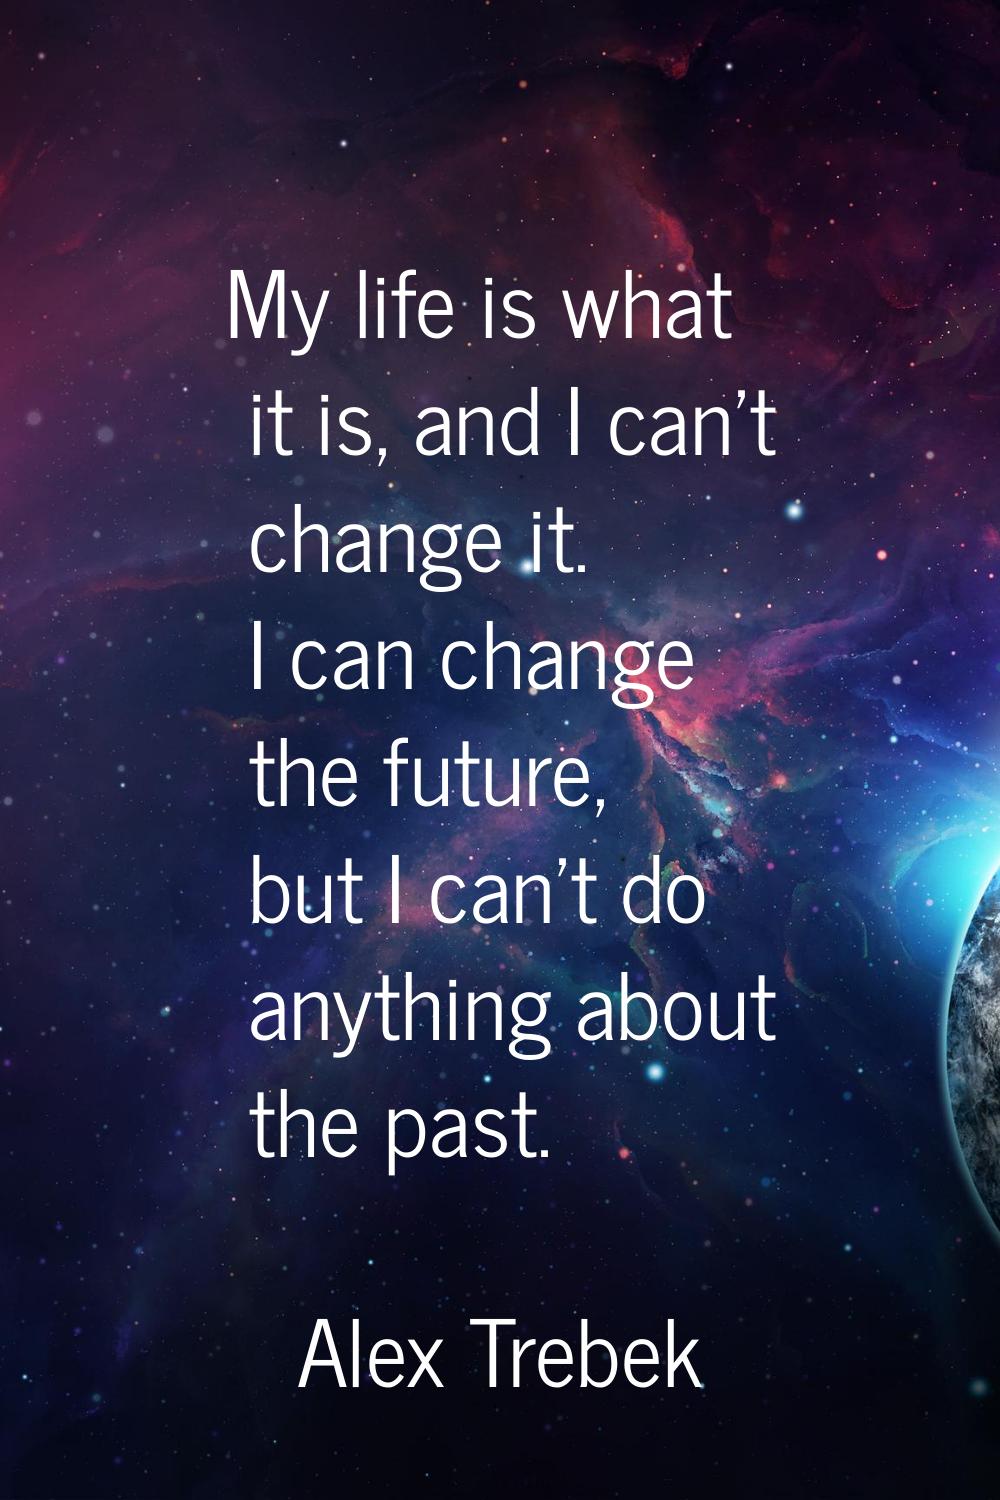 My life is what it is, and I can't change it. I can change the future, but I can't do anything abou